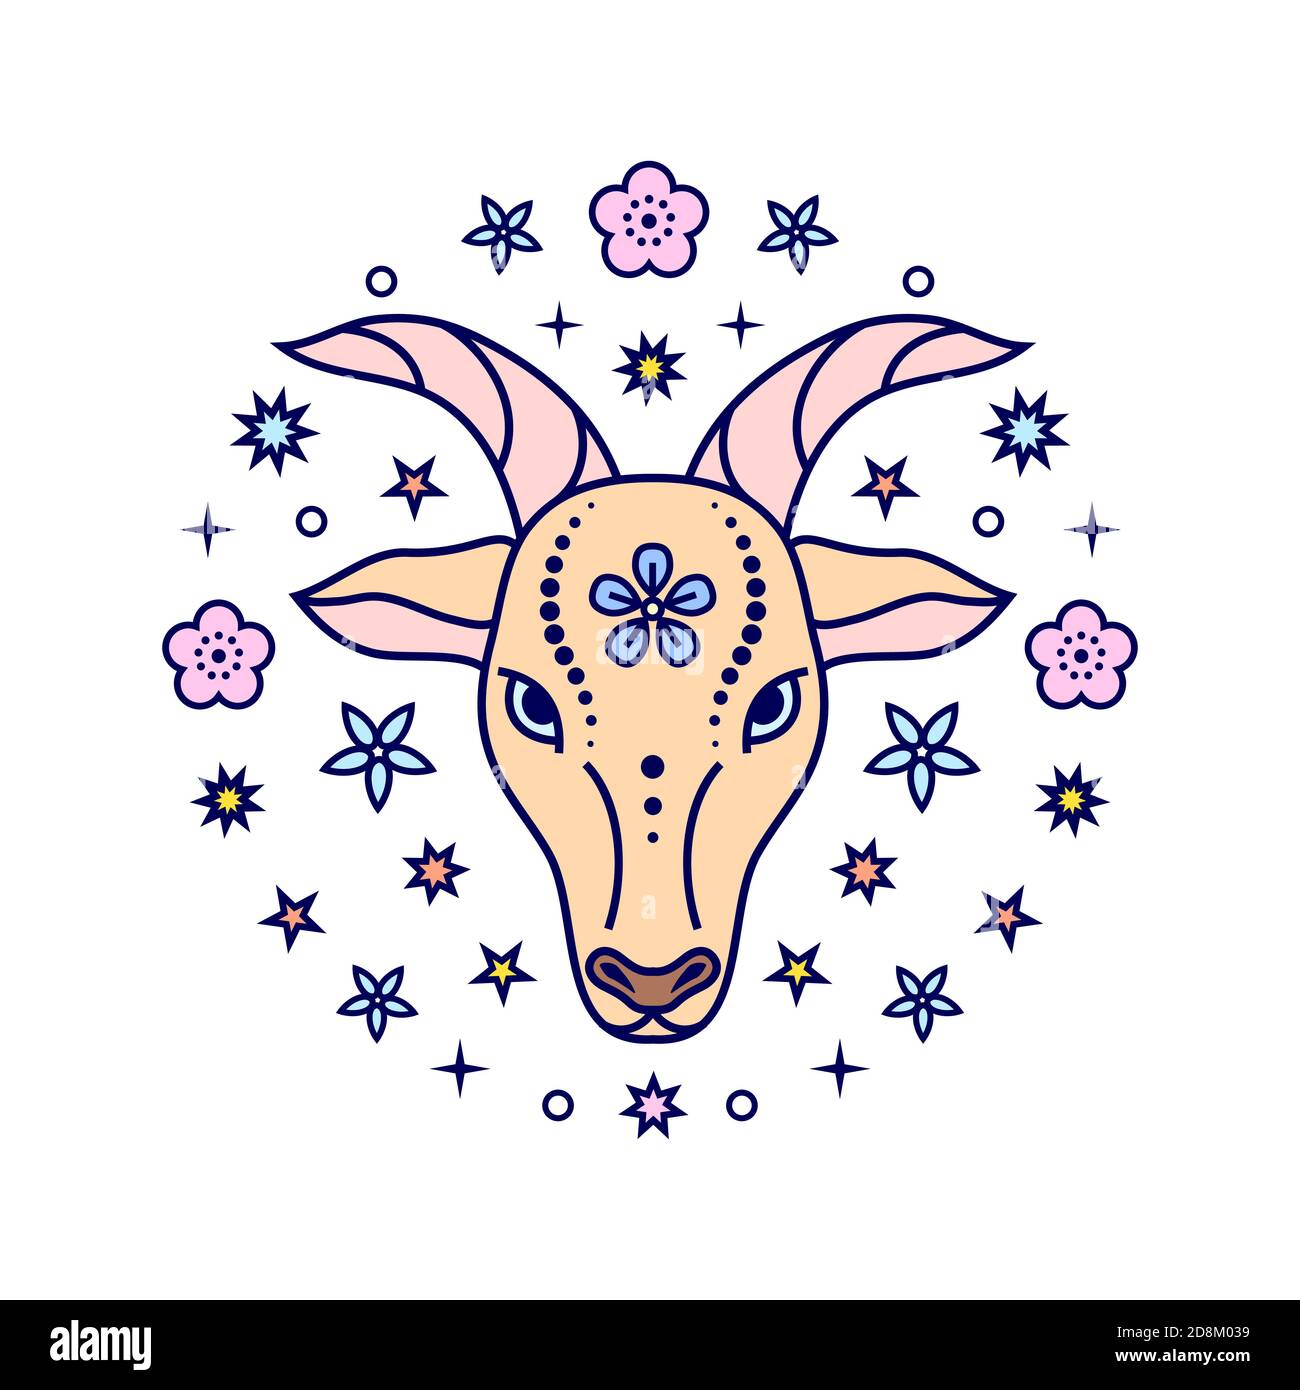 Goat Tattoo Silhouette Stock Vector Royalty Free 295745816  Shutterstock